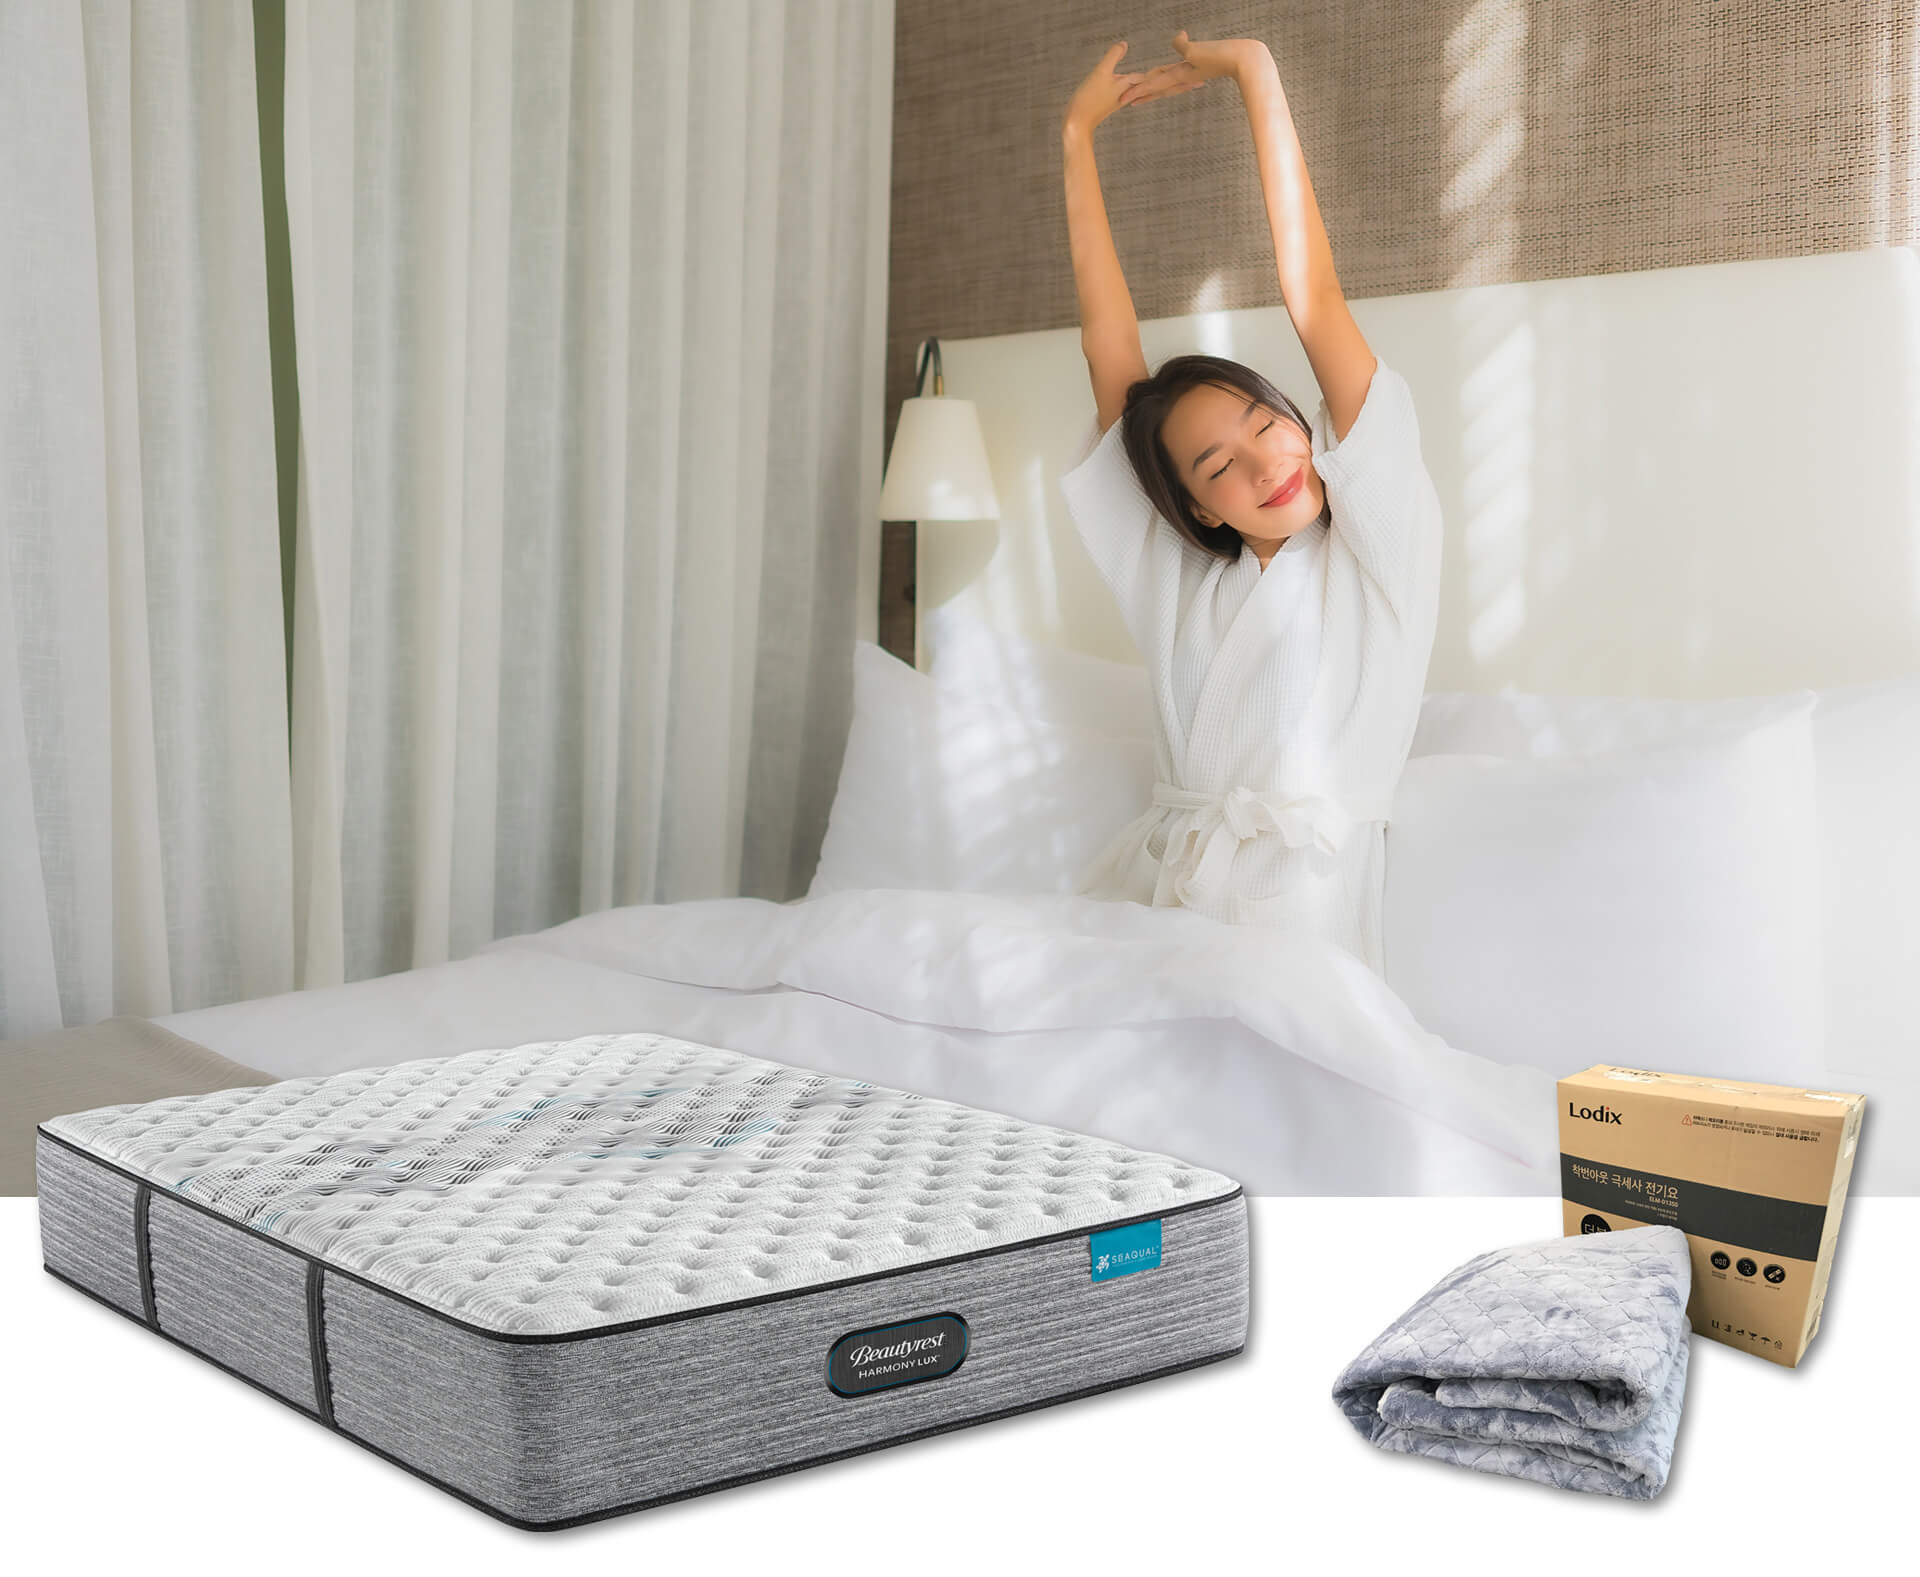 Beautyrest Harmony Lux Extra Firm Mattress Sale